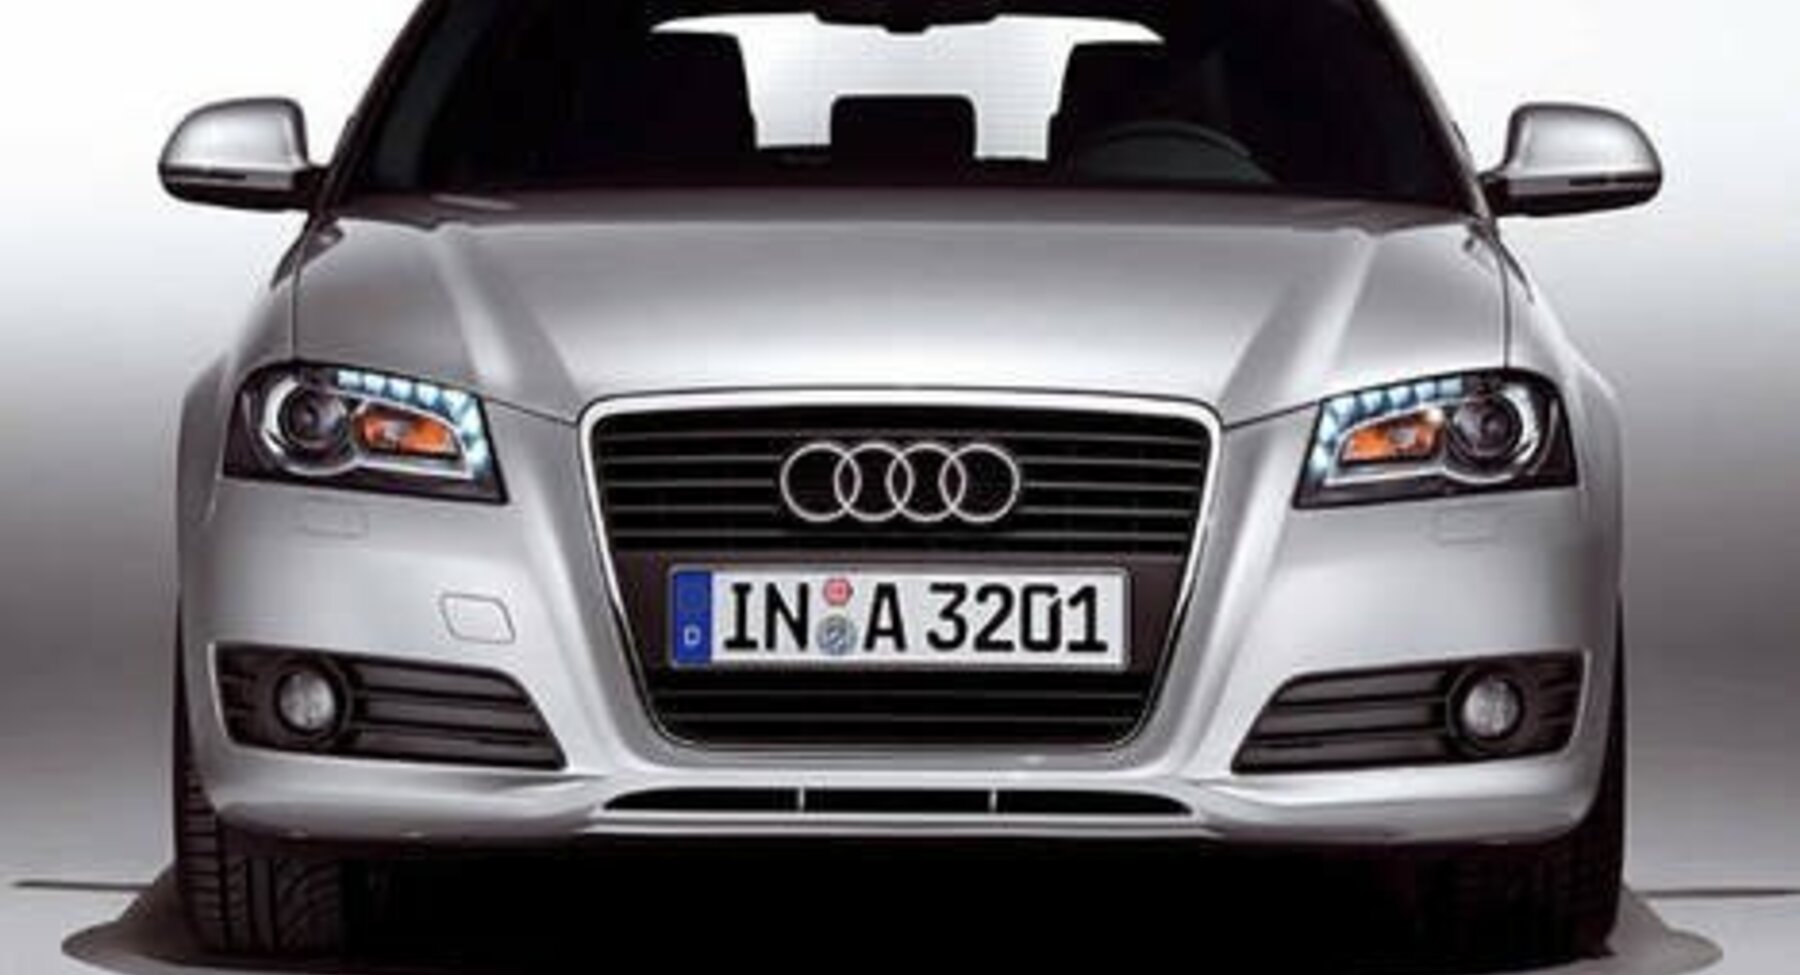 Audi A3 (8P, facelift 2008) 2.0 TDI (170 Hp) quattro 2008, 2009, 2010,  2011, 2012, 2013 specifications, prices & reviews